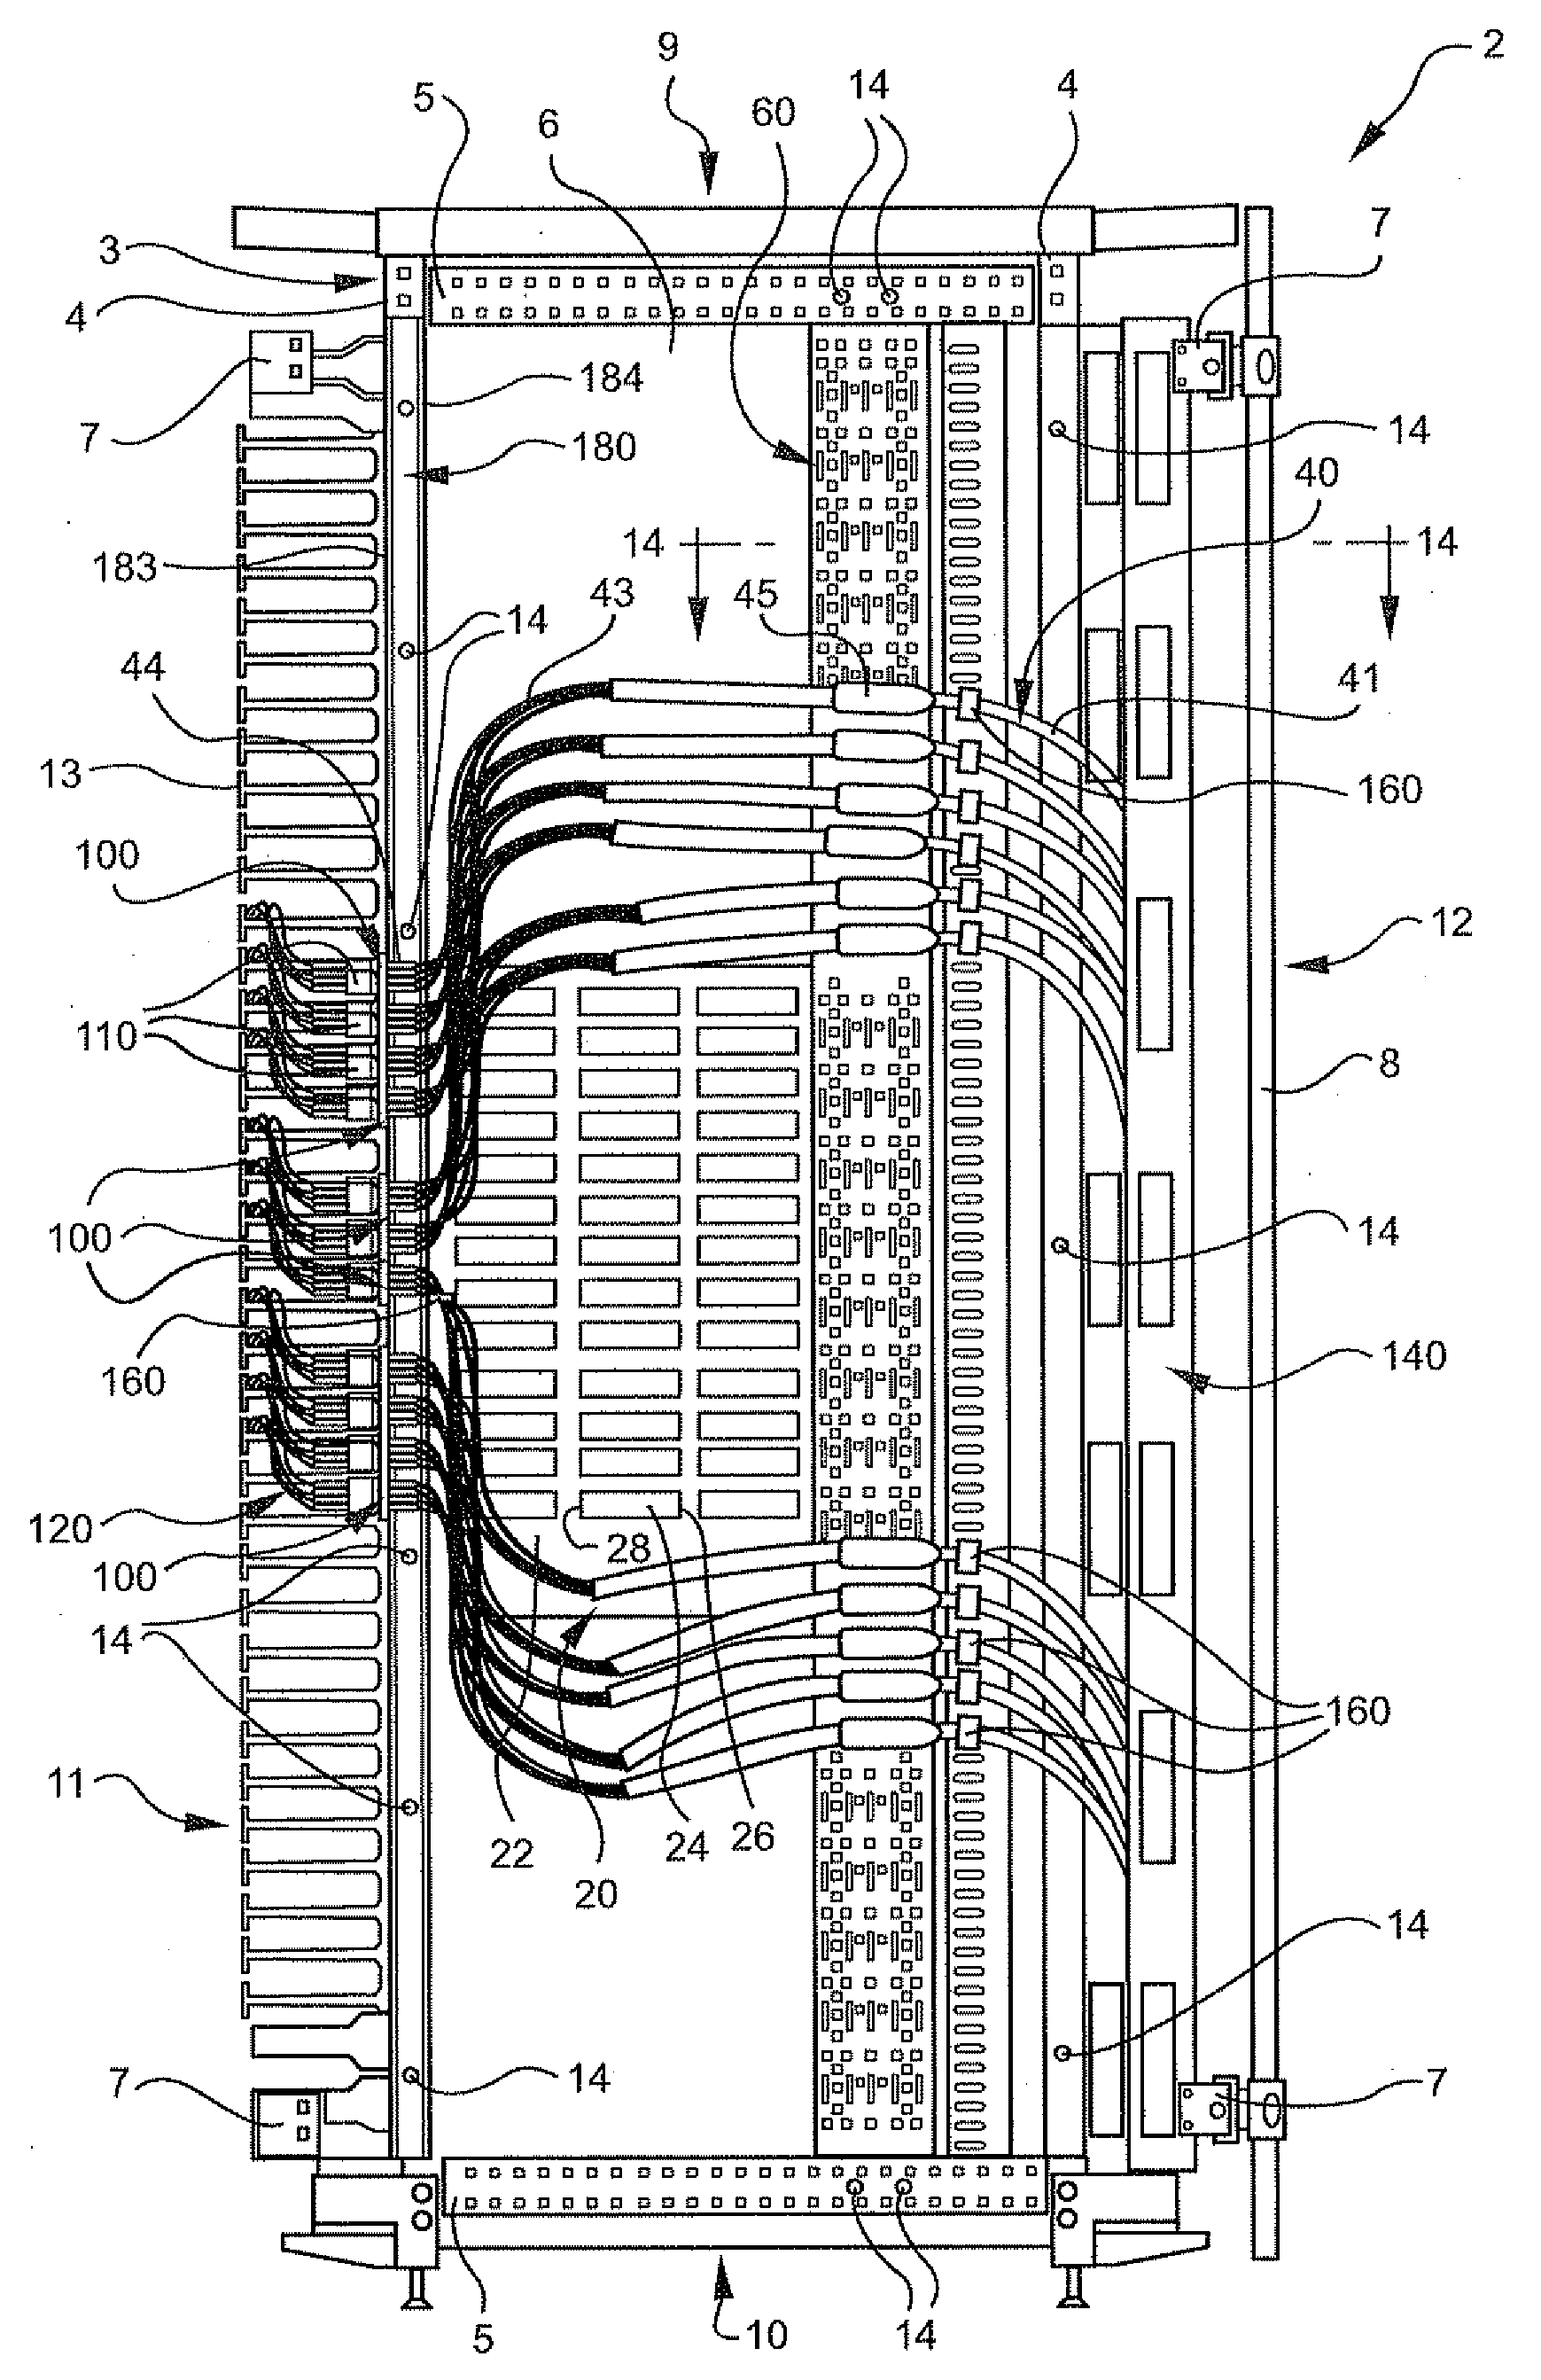 Apparatus and method for organizing cables in a cabinet